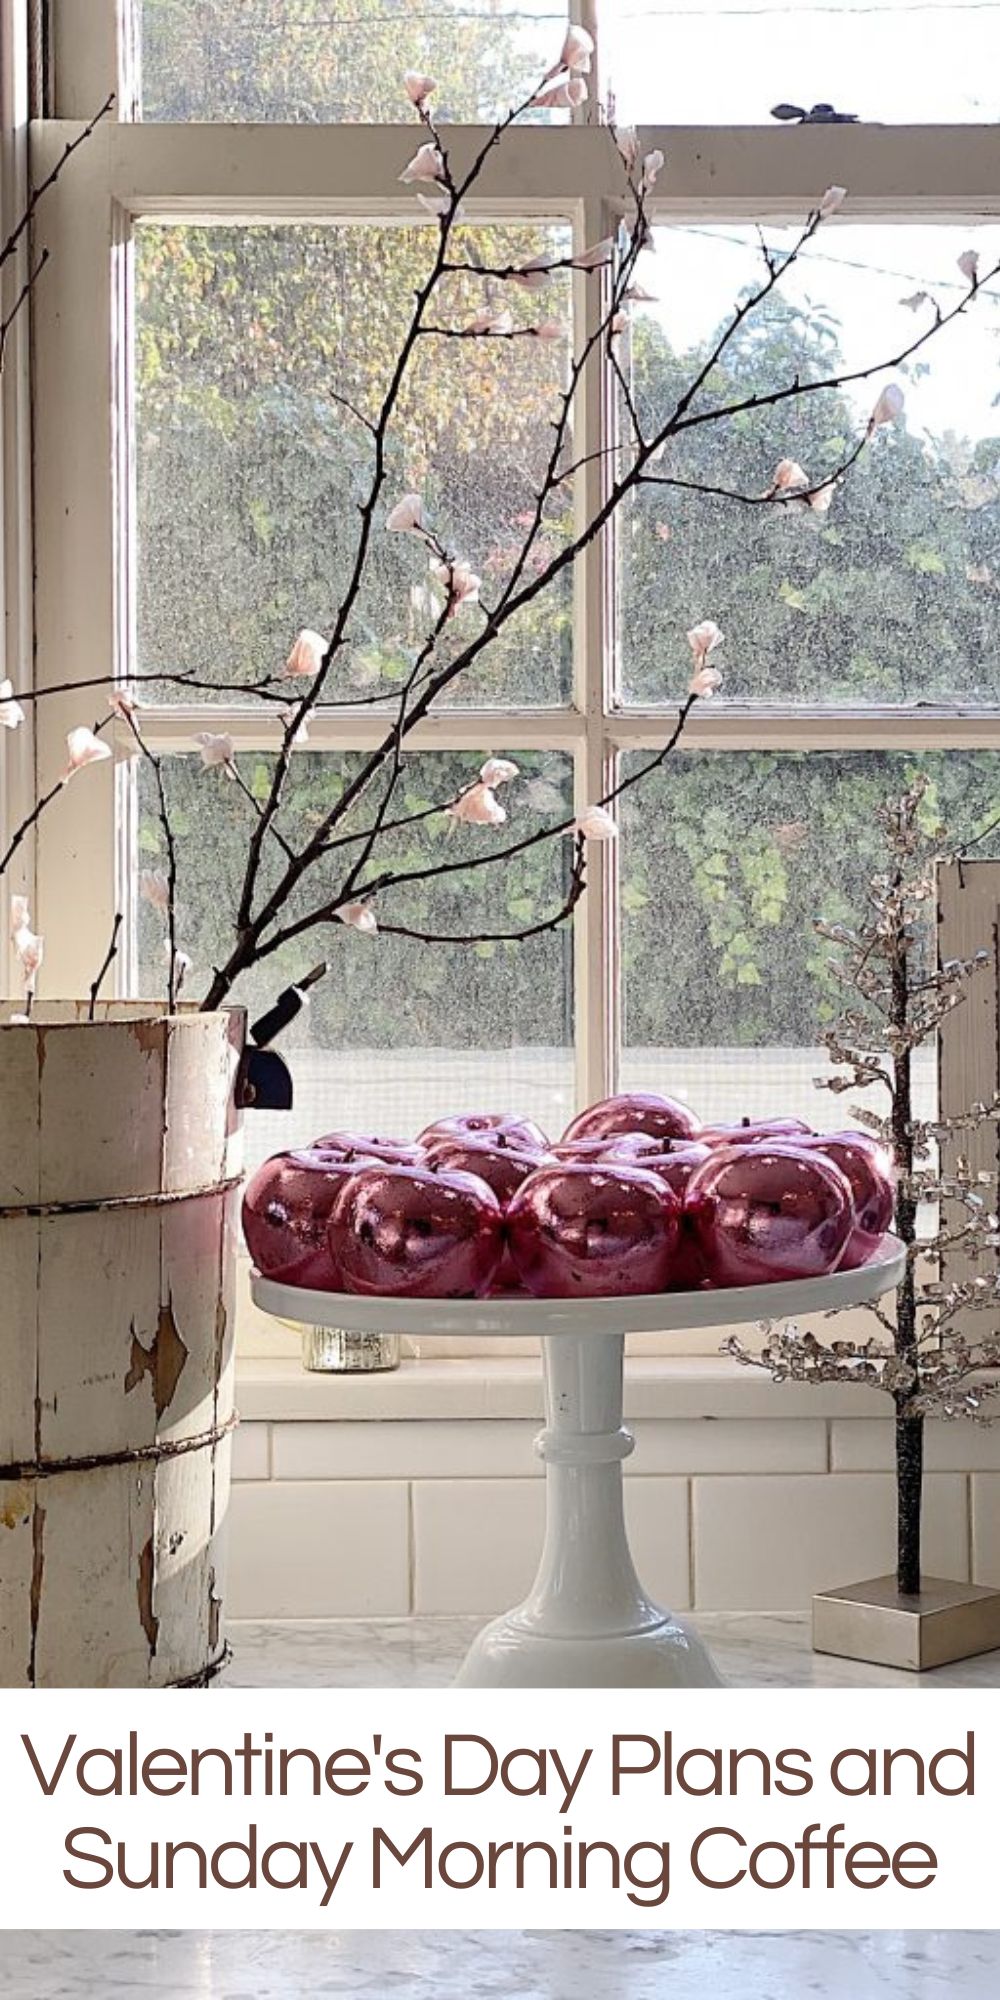 Do you have plans for your home for Valentine's Day? I love to decorate, craft, and bake, and can't wait to share my Valentine's Day plans with you.